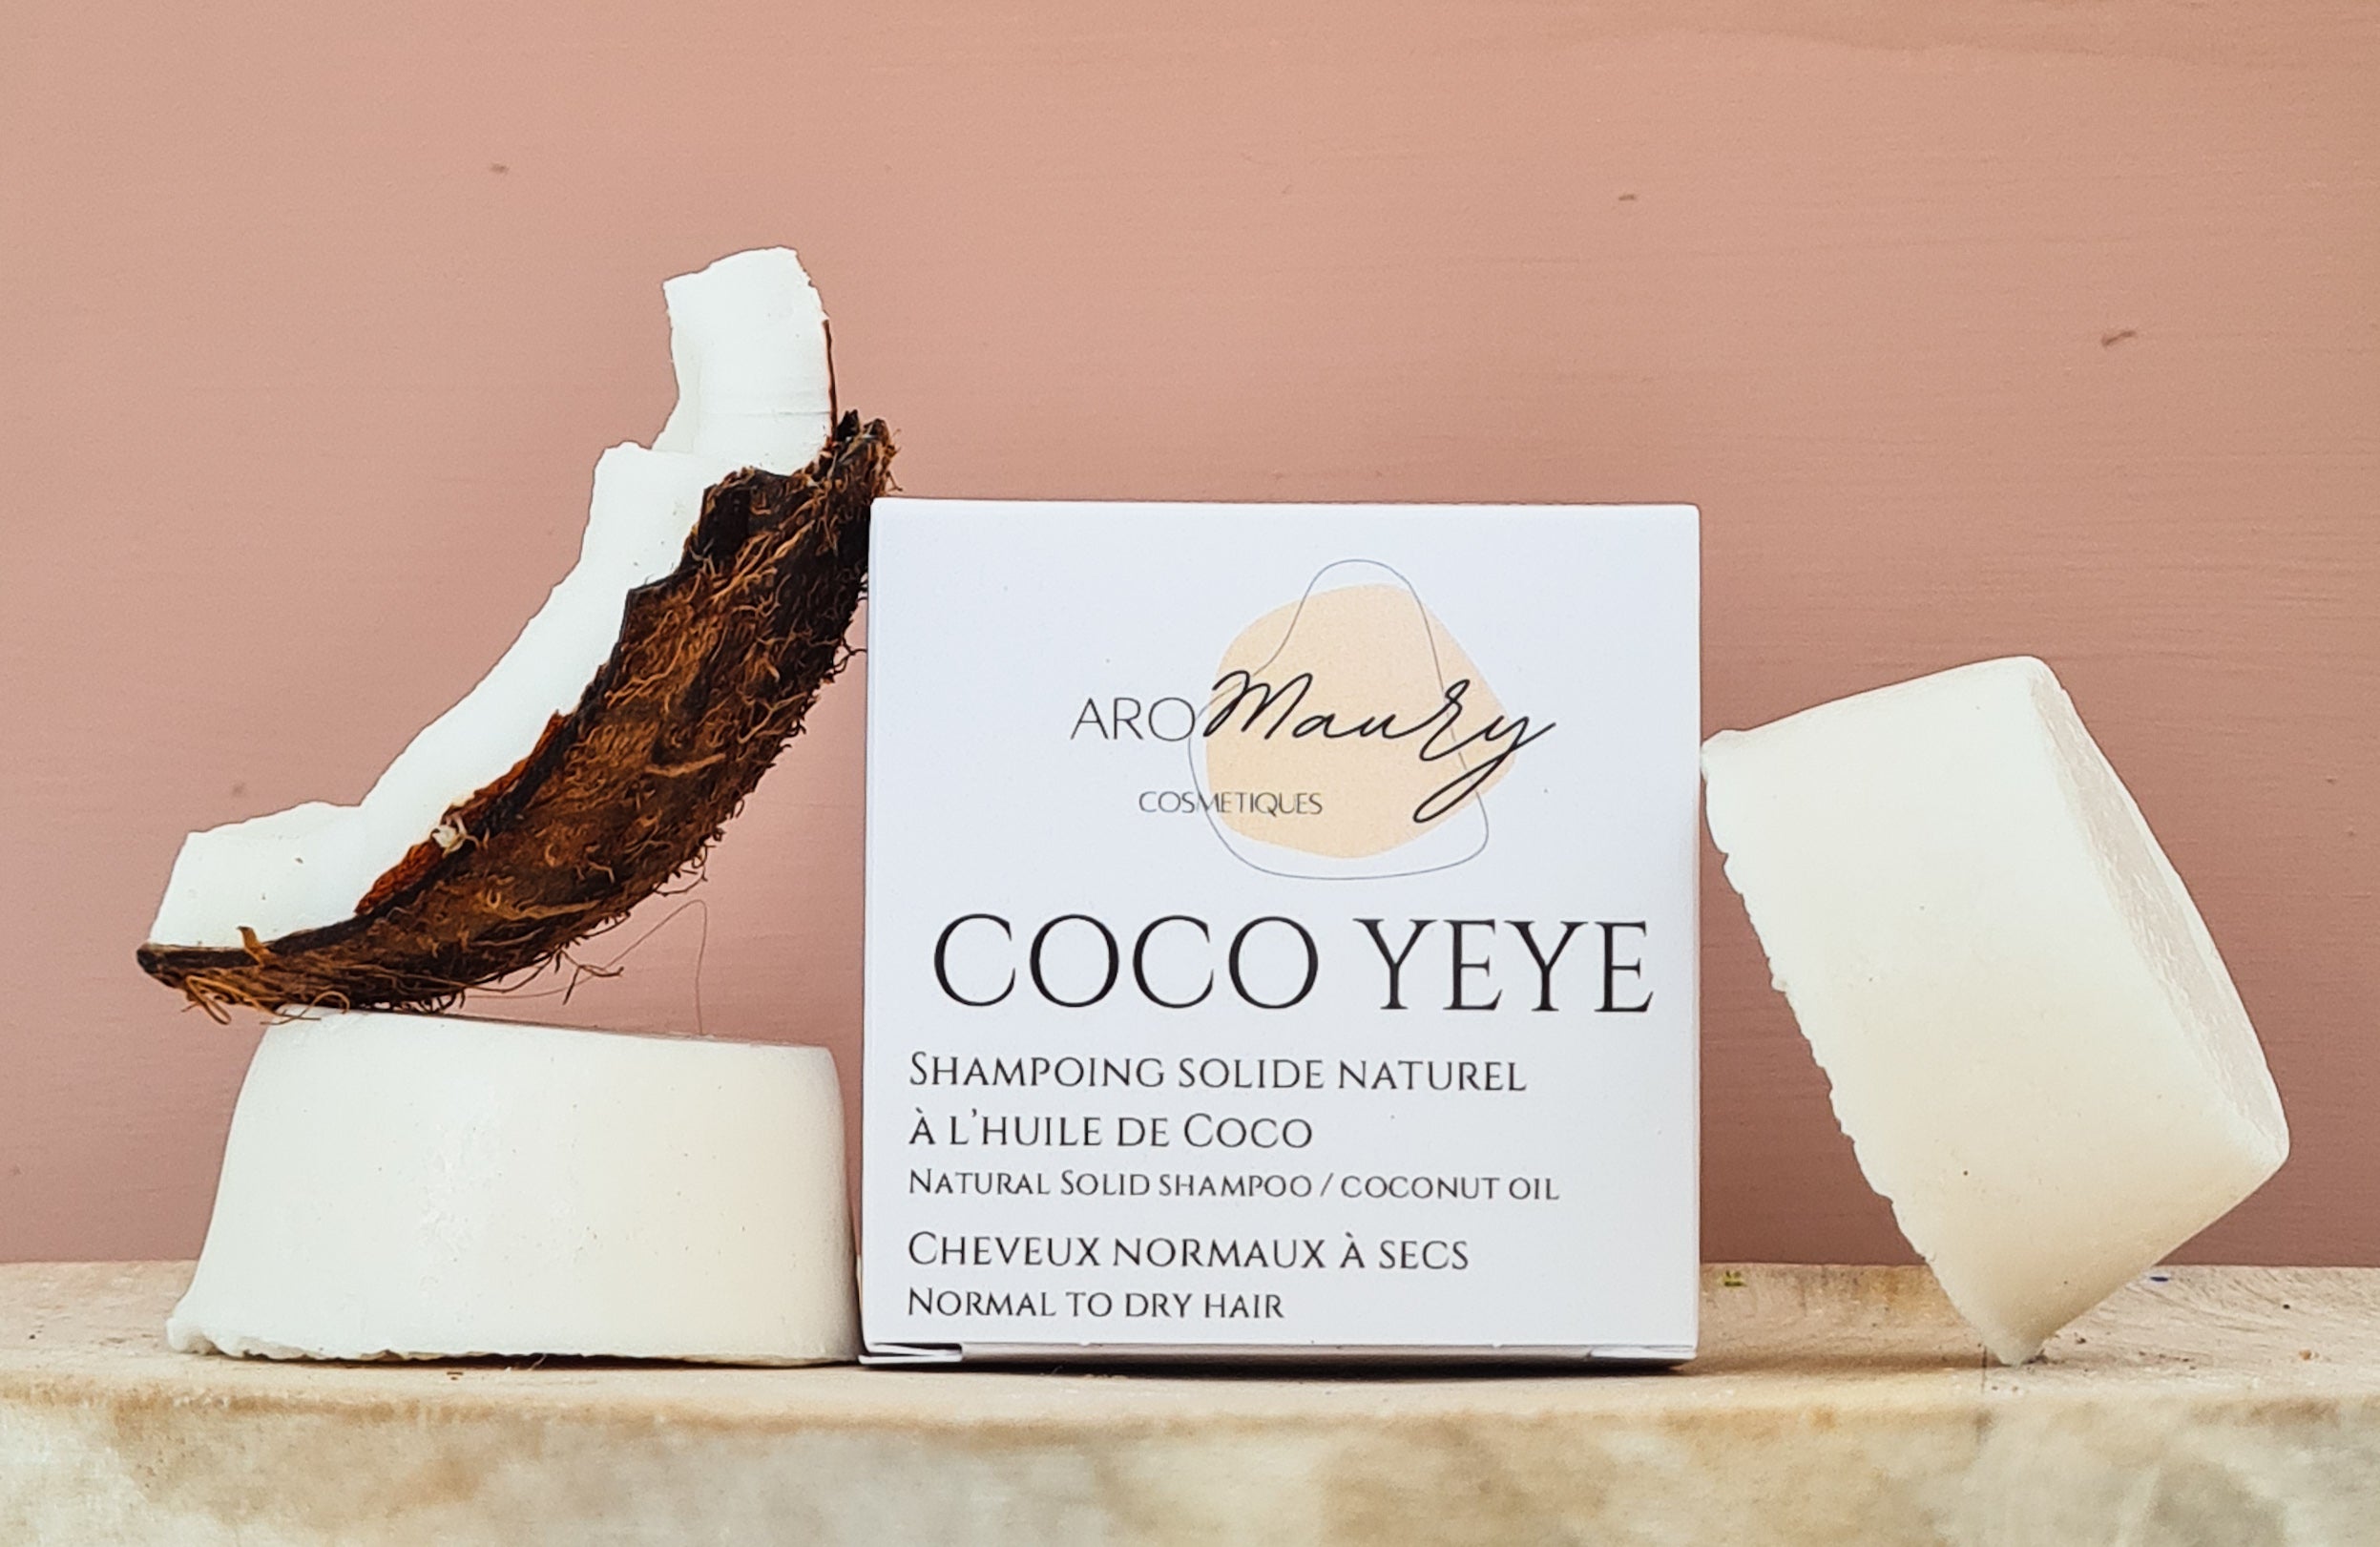 Coco Yéyé  Shampoing solide naturel AROMAURY®